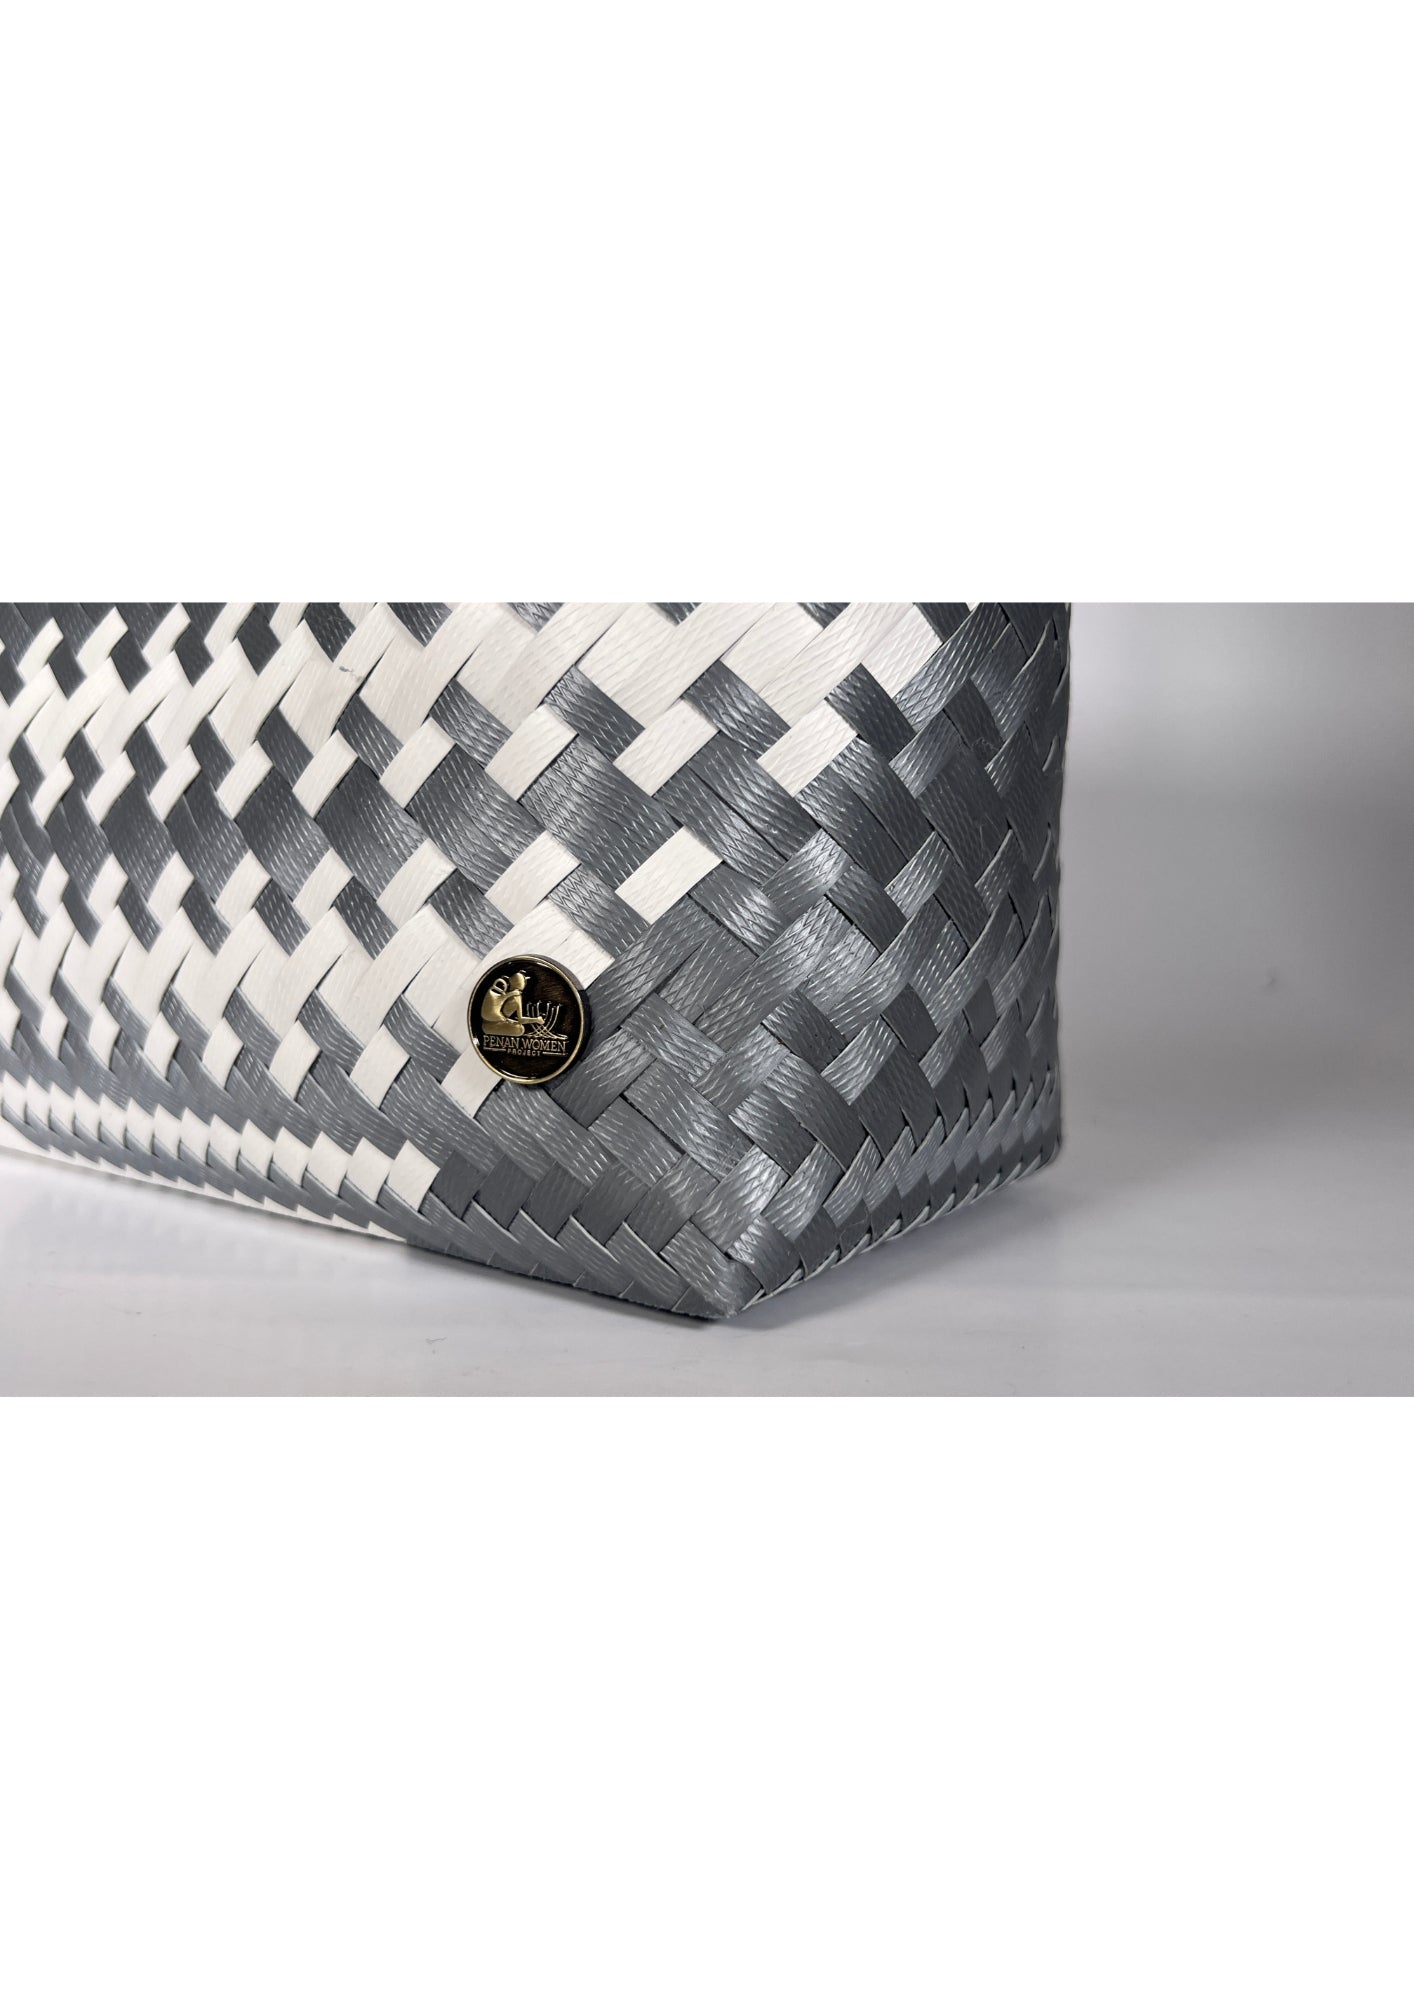 White & Silver Patterned Bag